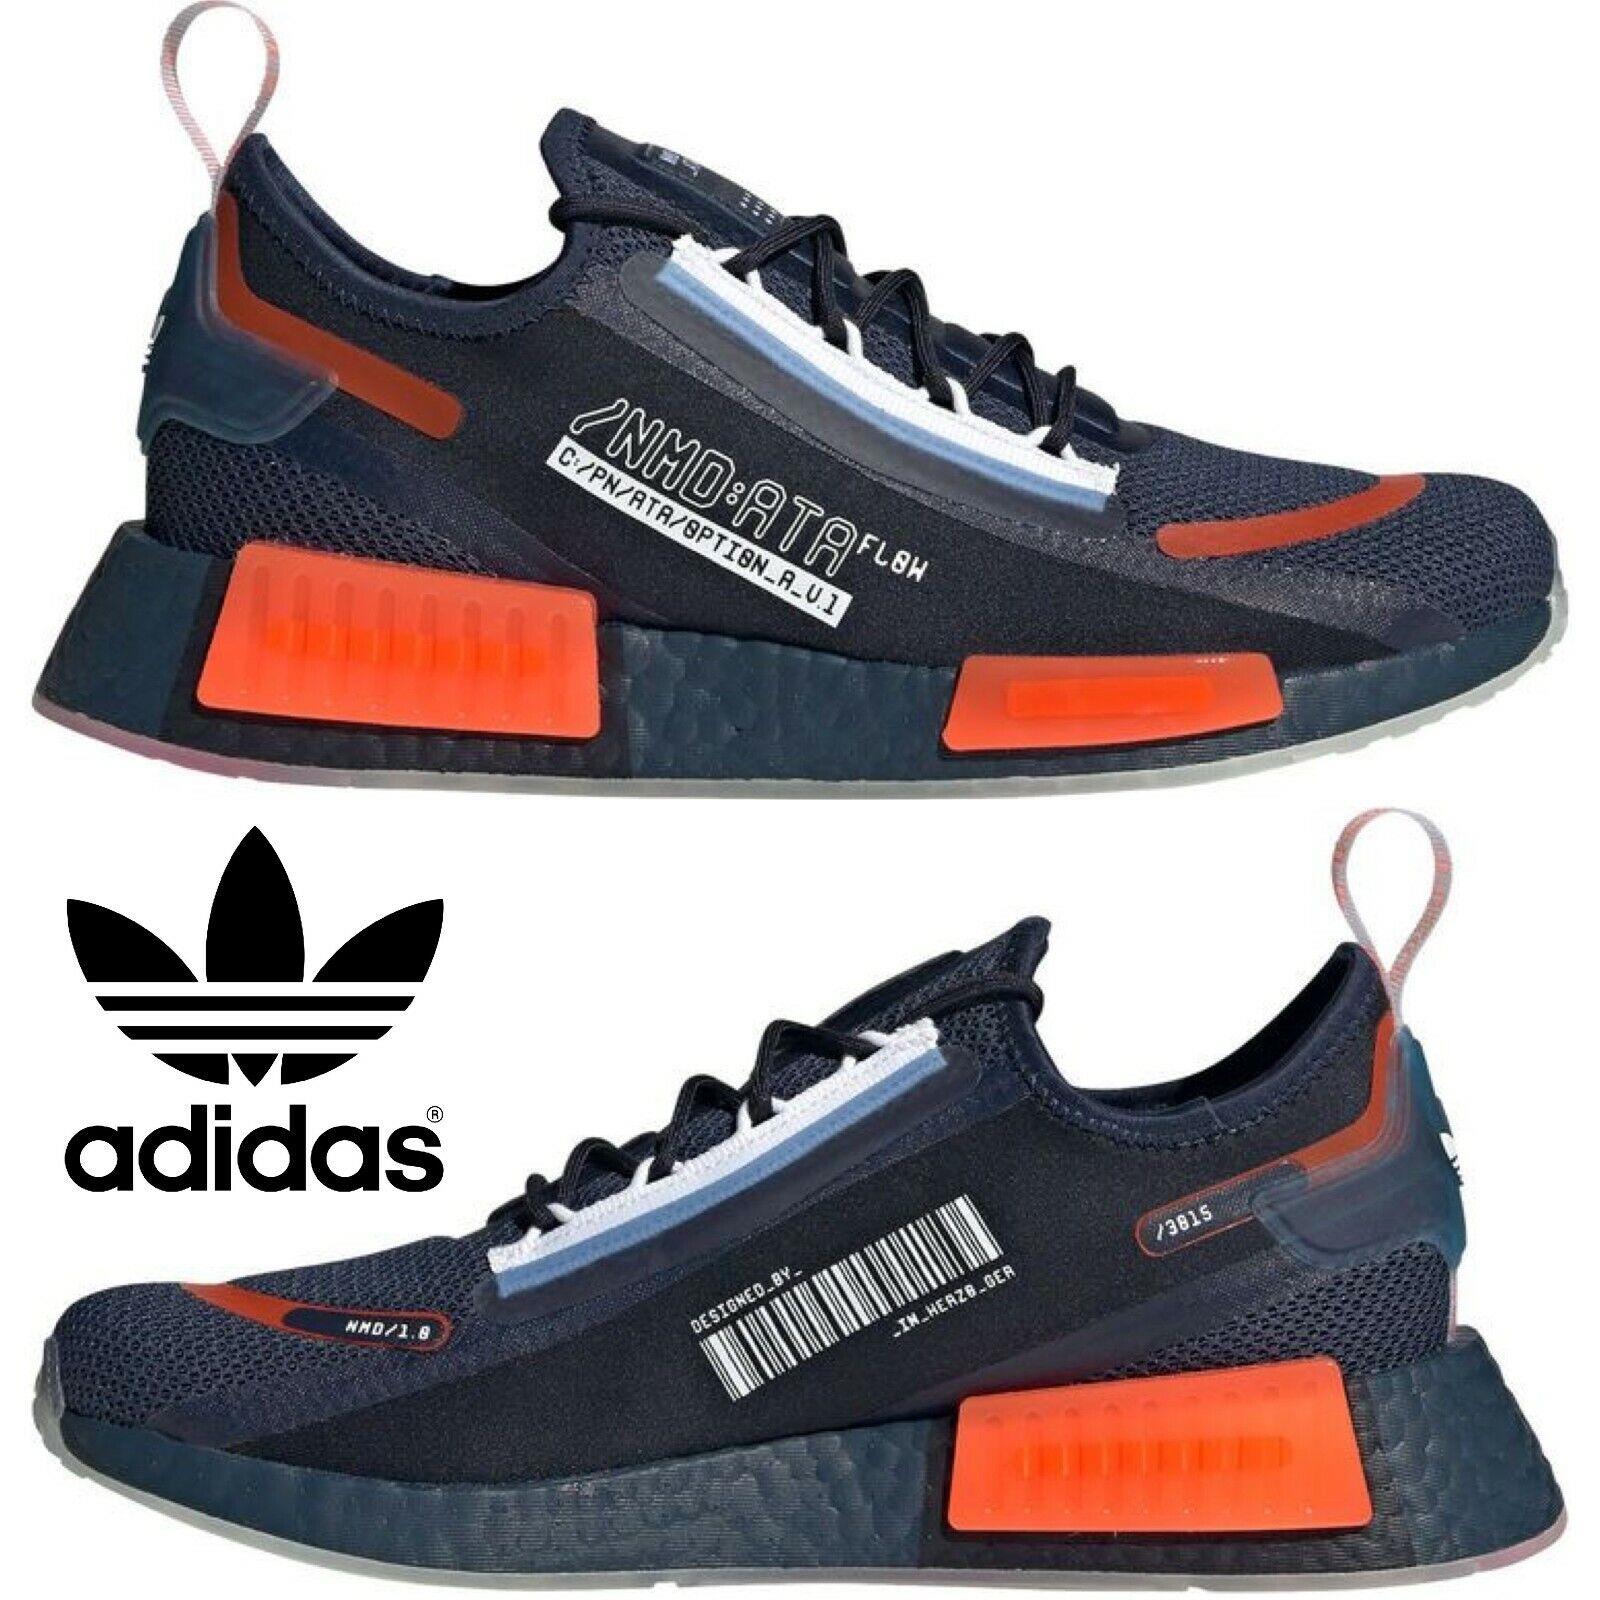 Adidas Originals Nmd R1 Men`s Sneakers Running Shoes Gym Casual Sport Navy